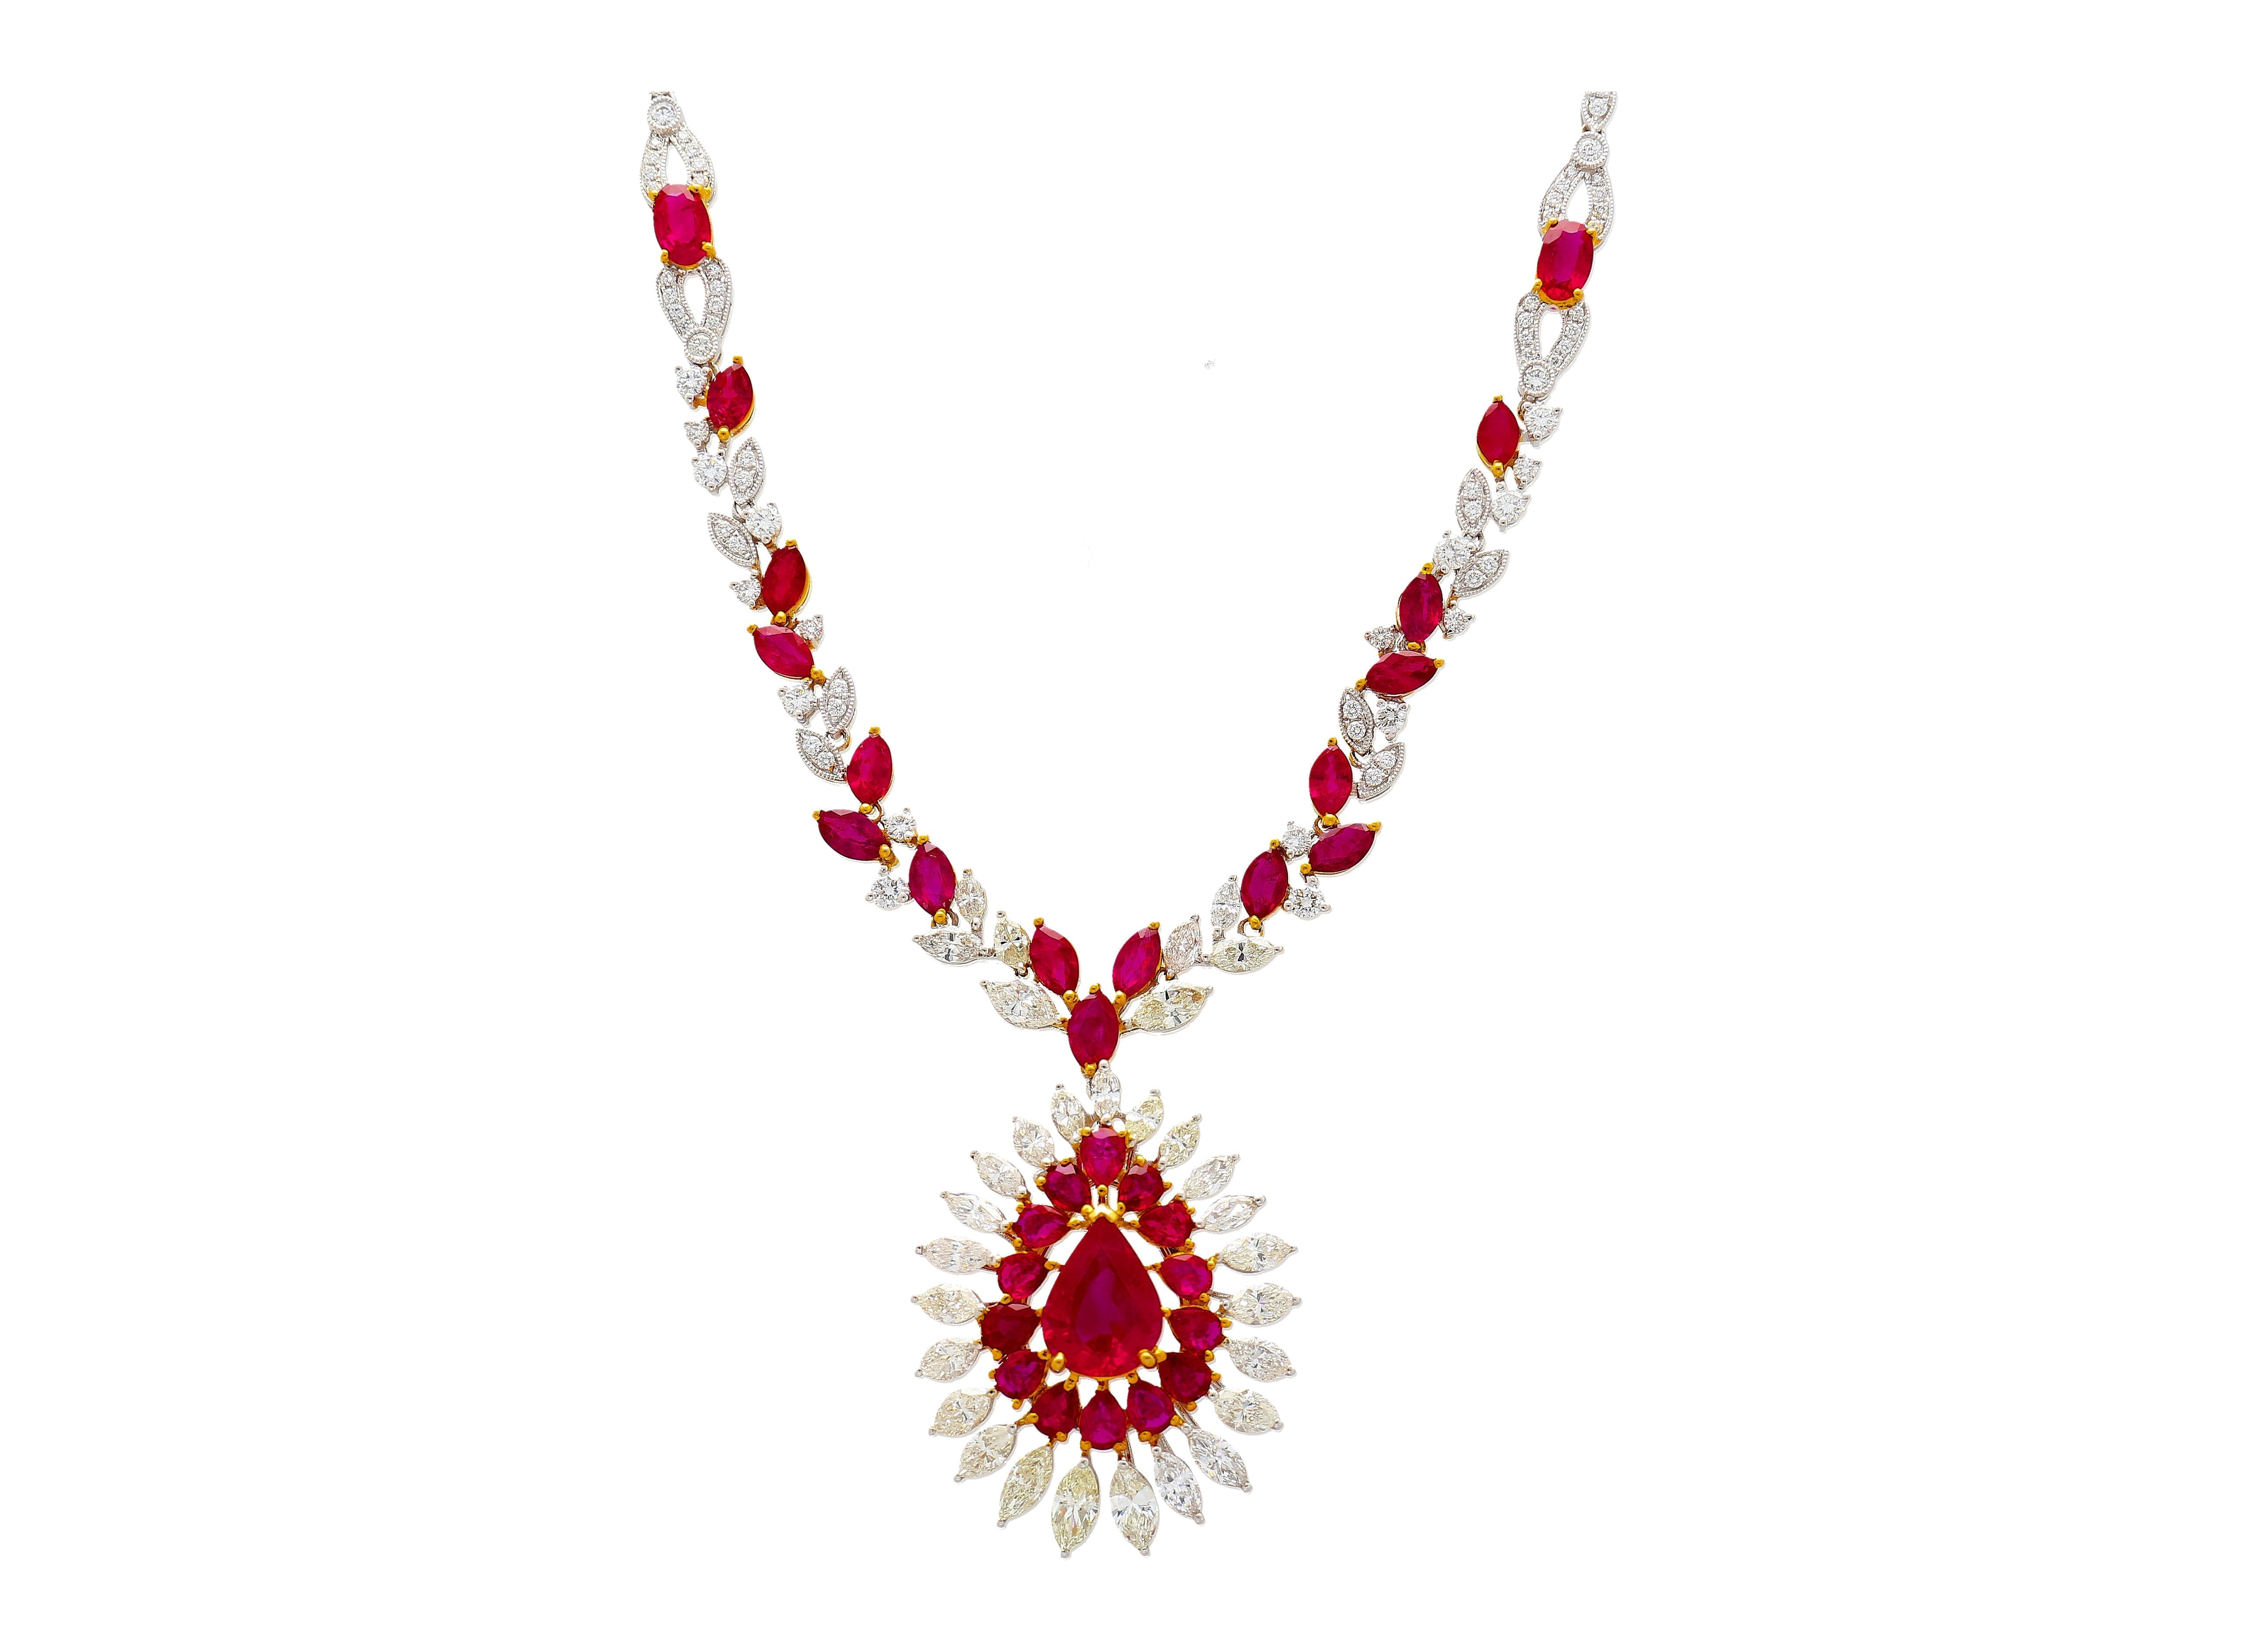 AGL-Certified-22-Carat-Pear-Cut-Burma-Ruby-and-Diamond-Chandelier-Necklace-Necklace.jpg